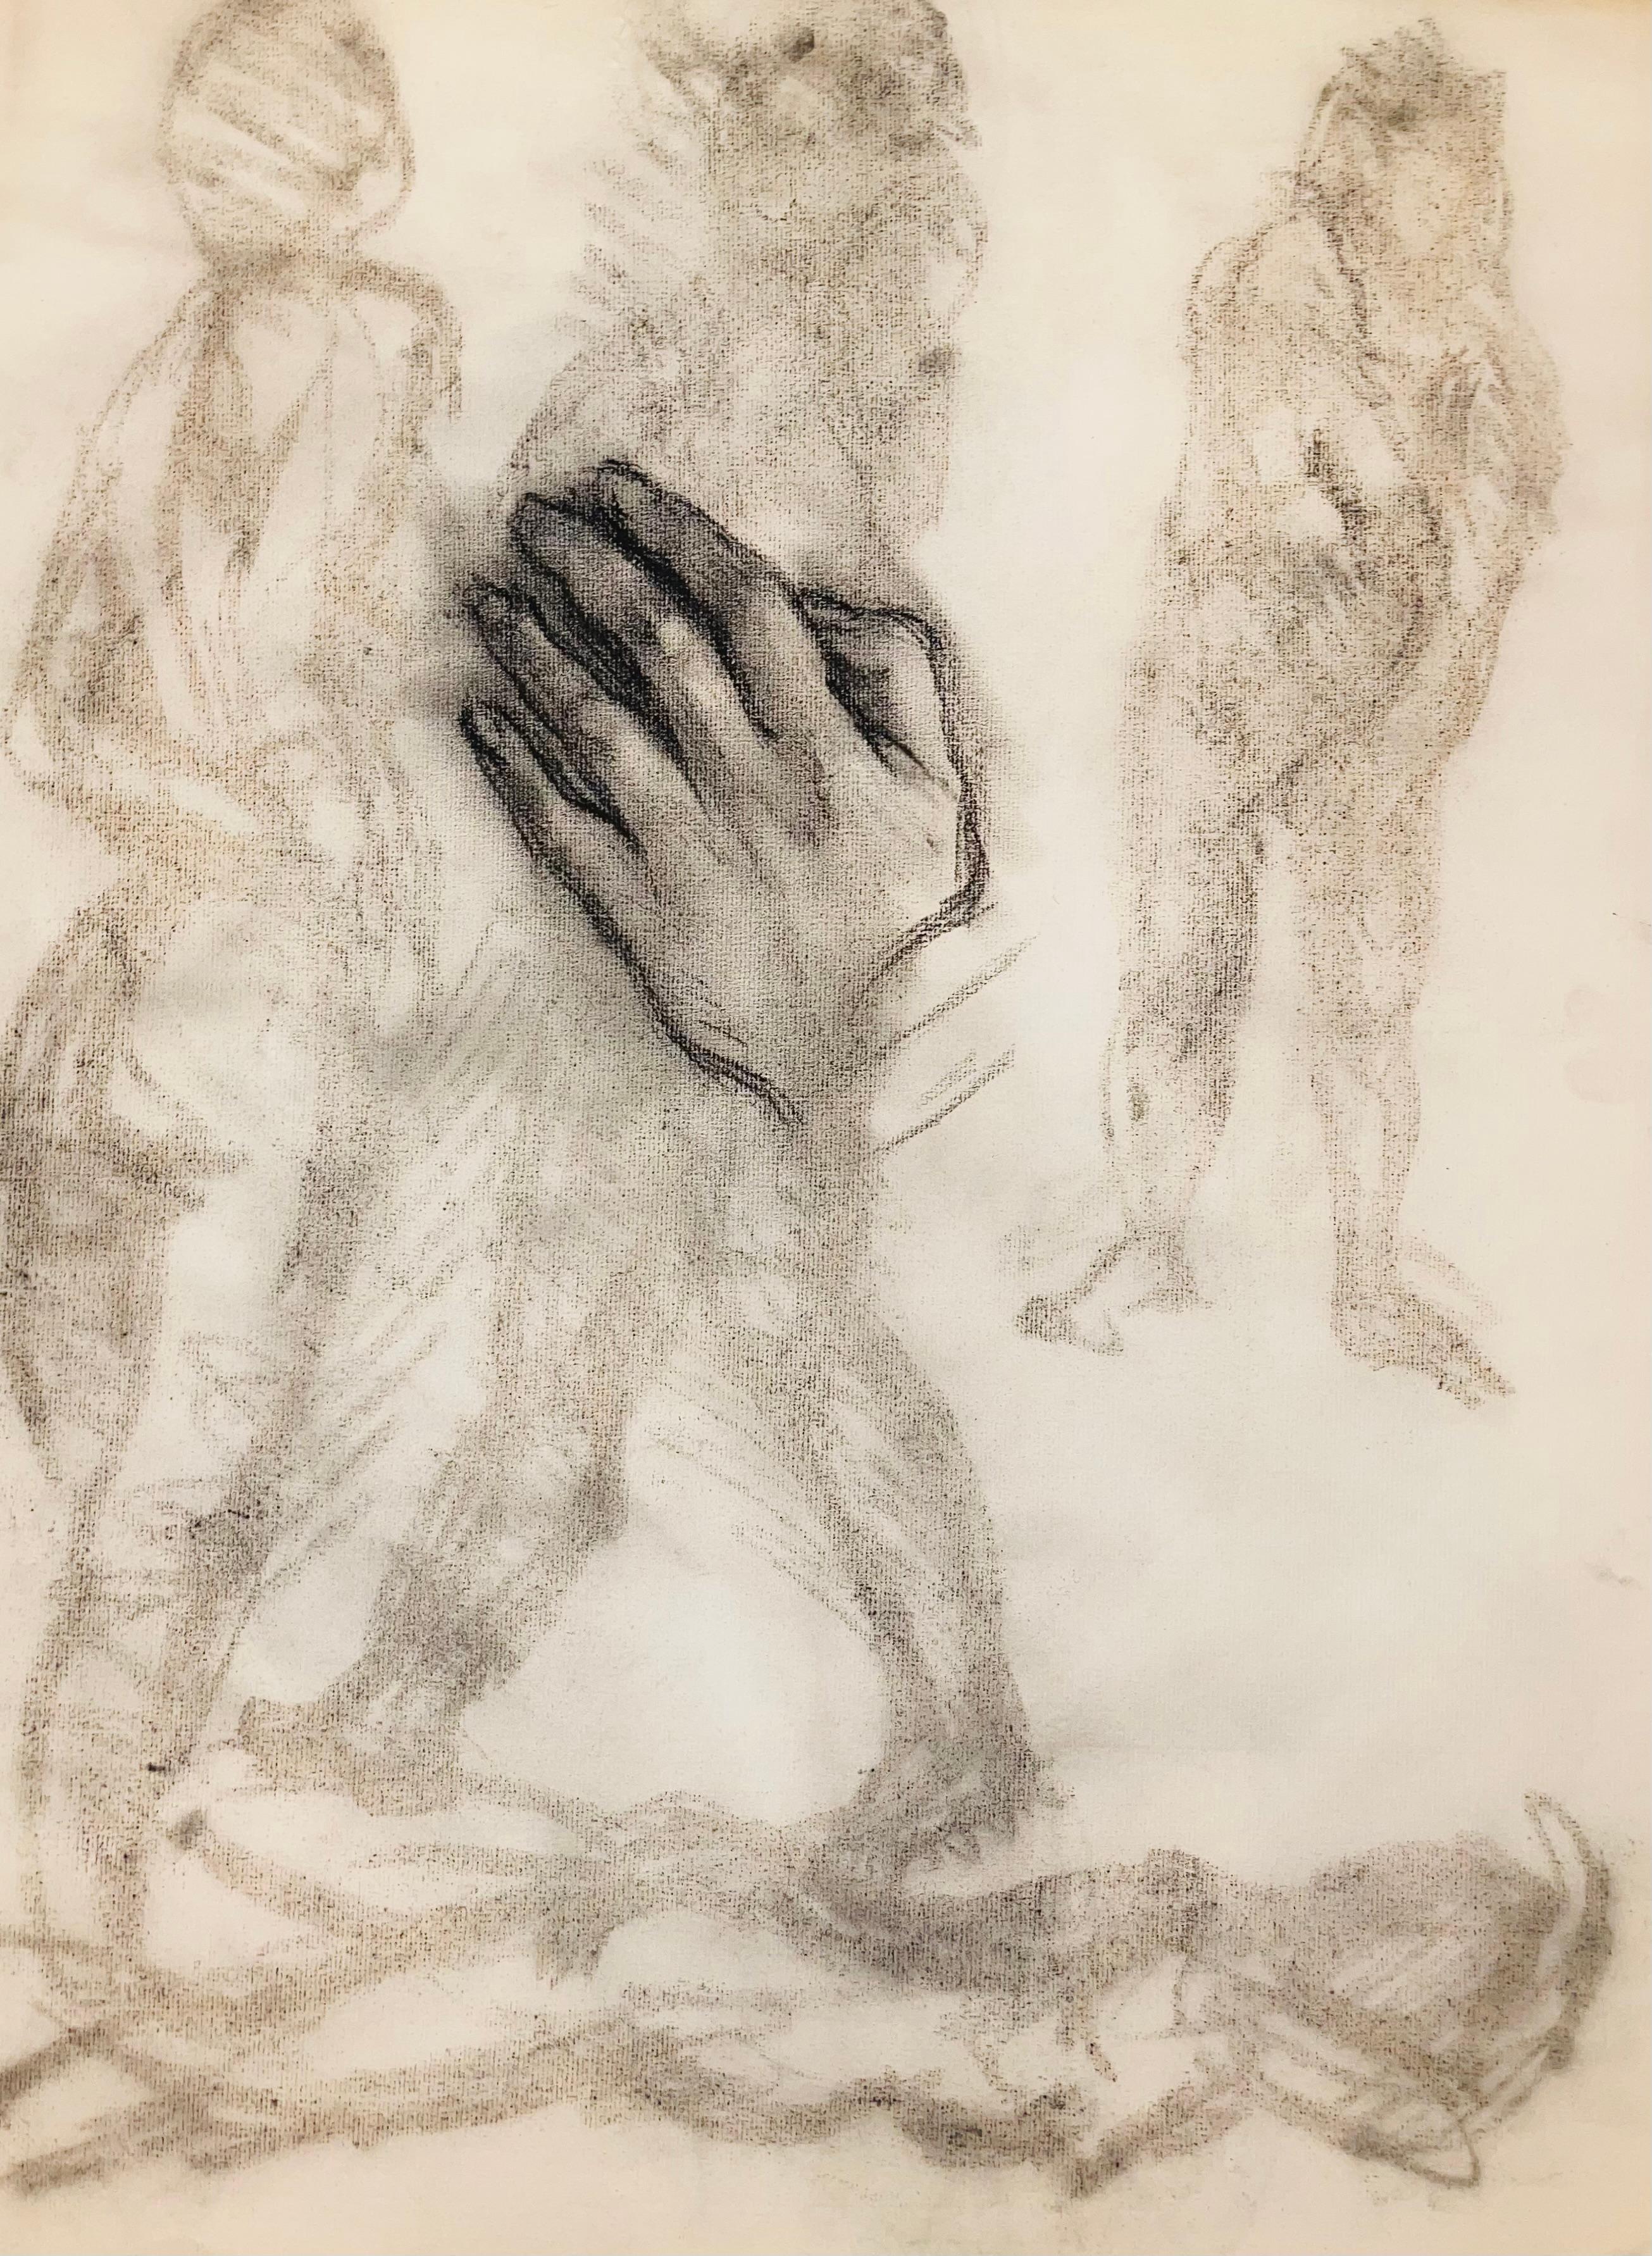 Untitled (Renaissance Hand and Female Nude Study), 1963, Ian Hornak — Drawing